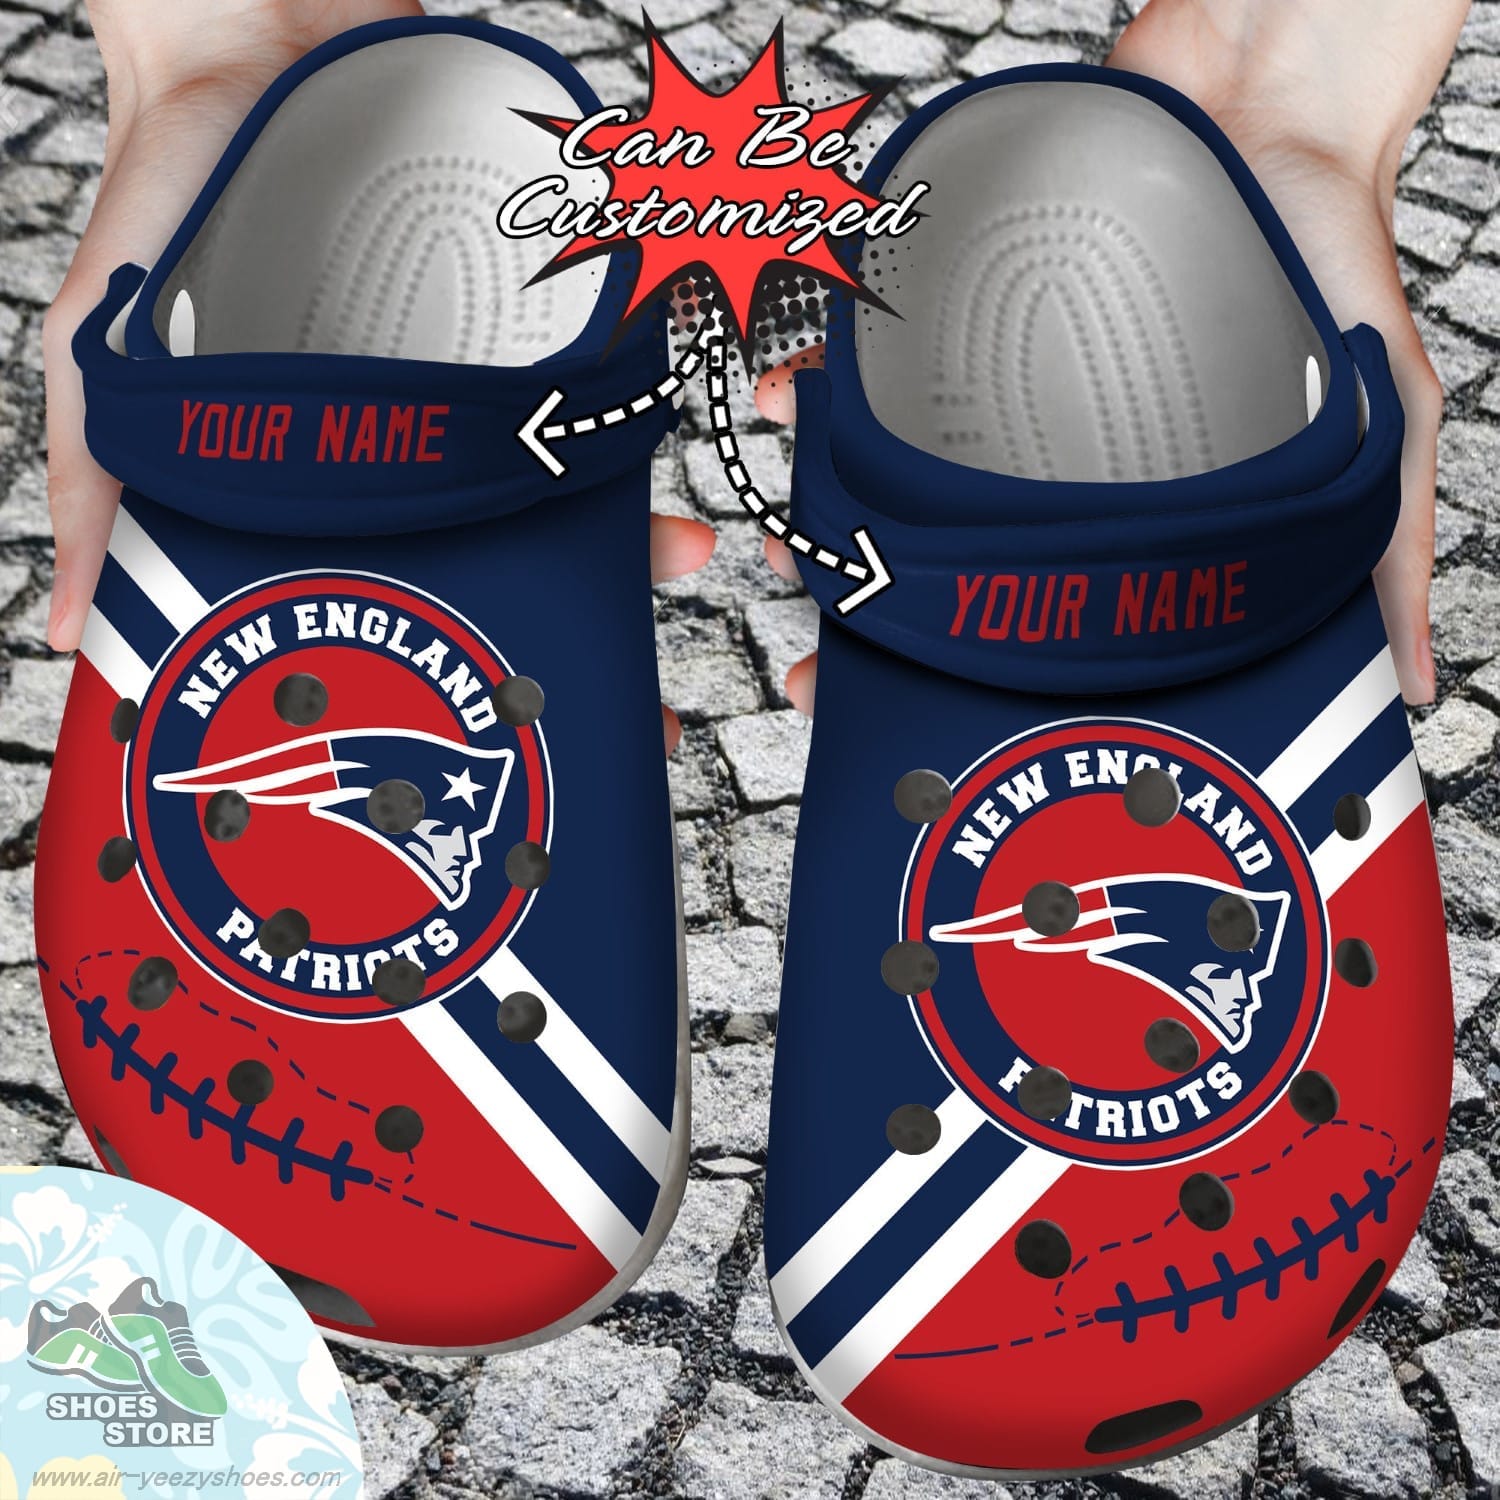 Personalized New England Patriots Football Team Rugby Clog Shoes Football Custom Crocs Shoes